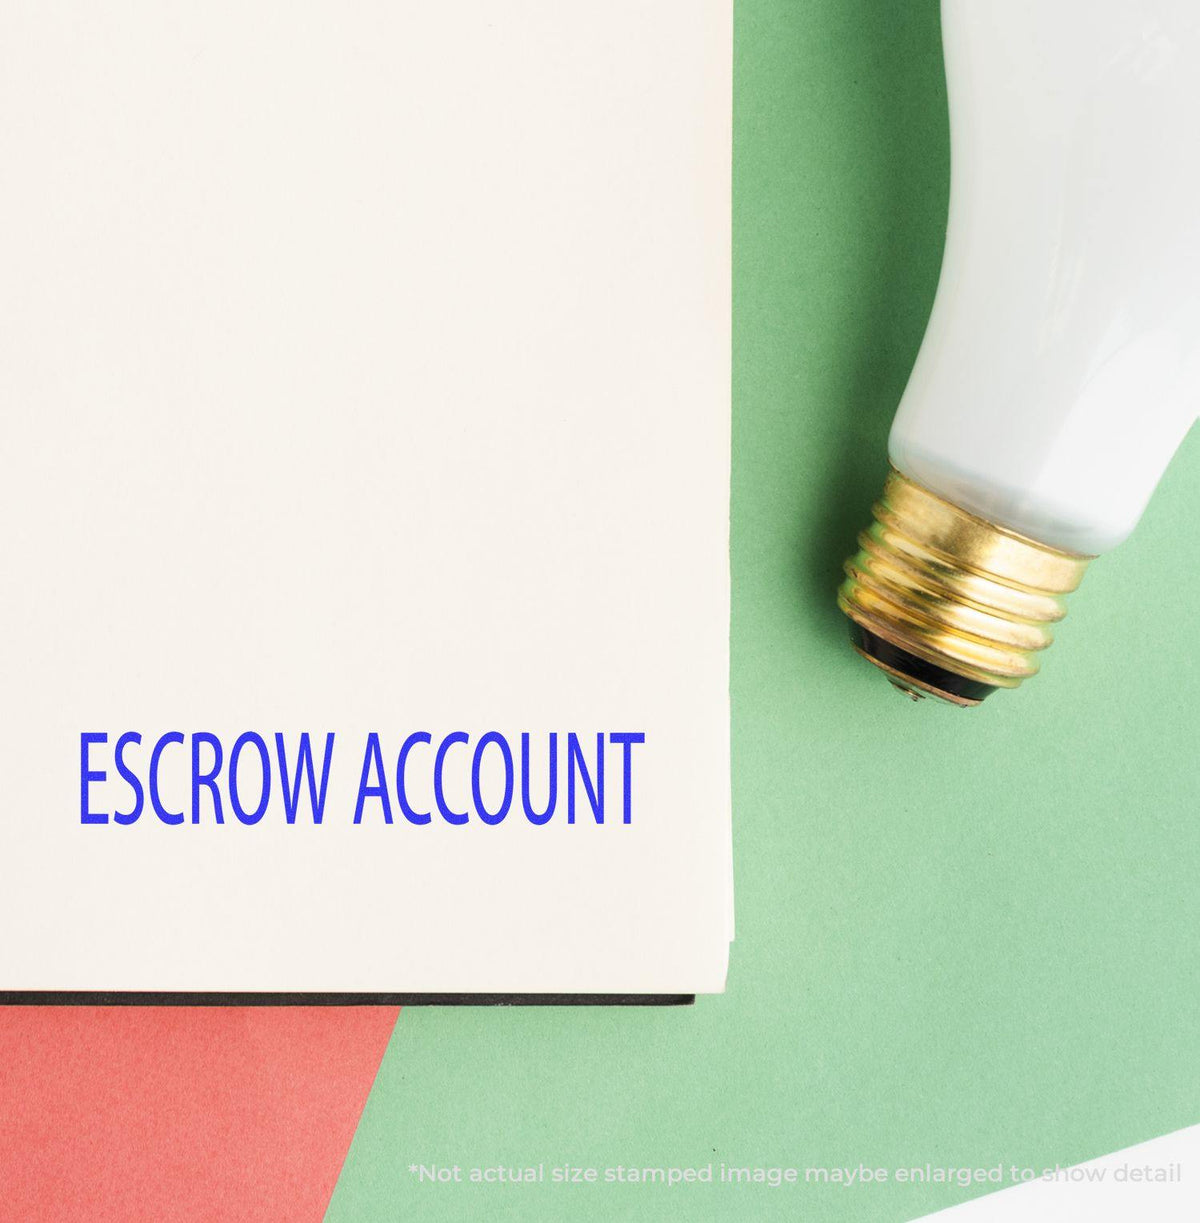 Large Escrow Account Rubber Stamp In Use Photo